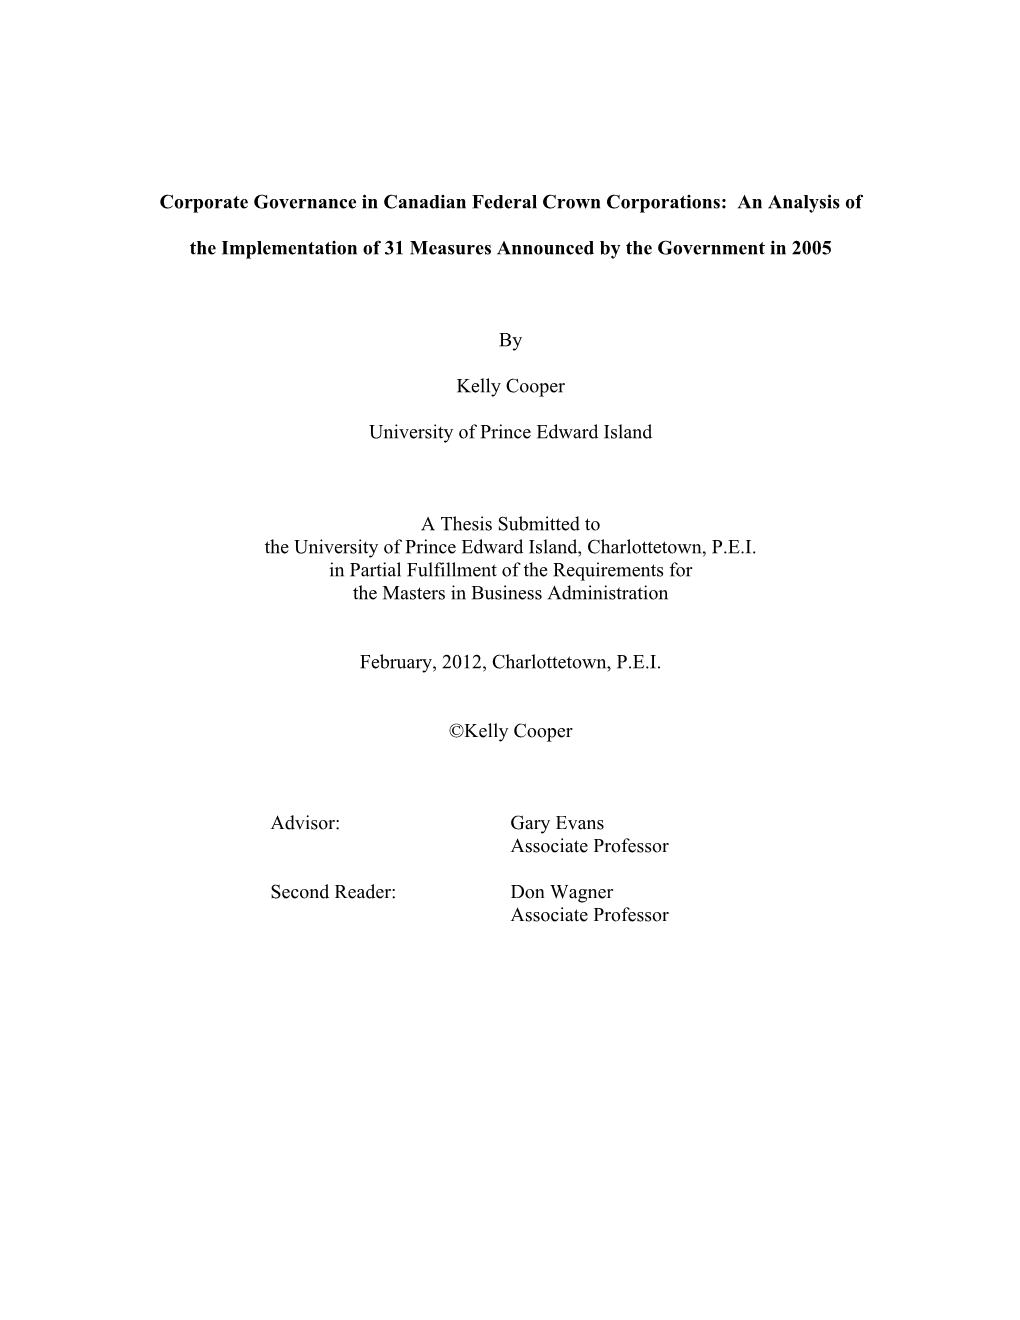 I Corporate Governance in Canadian Federal Crown